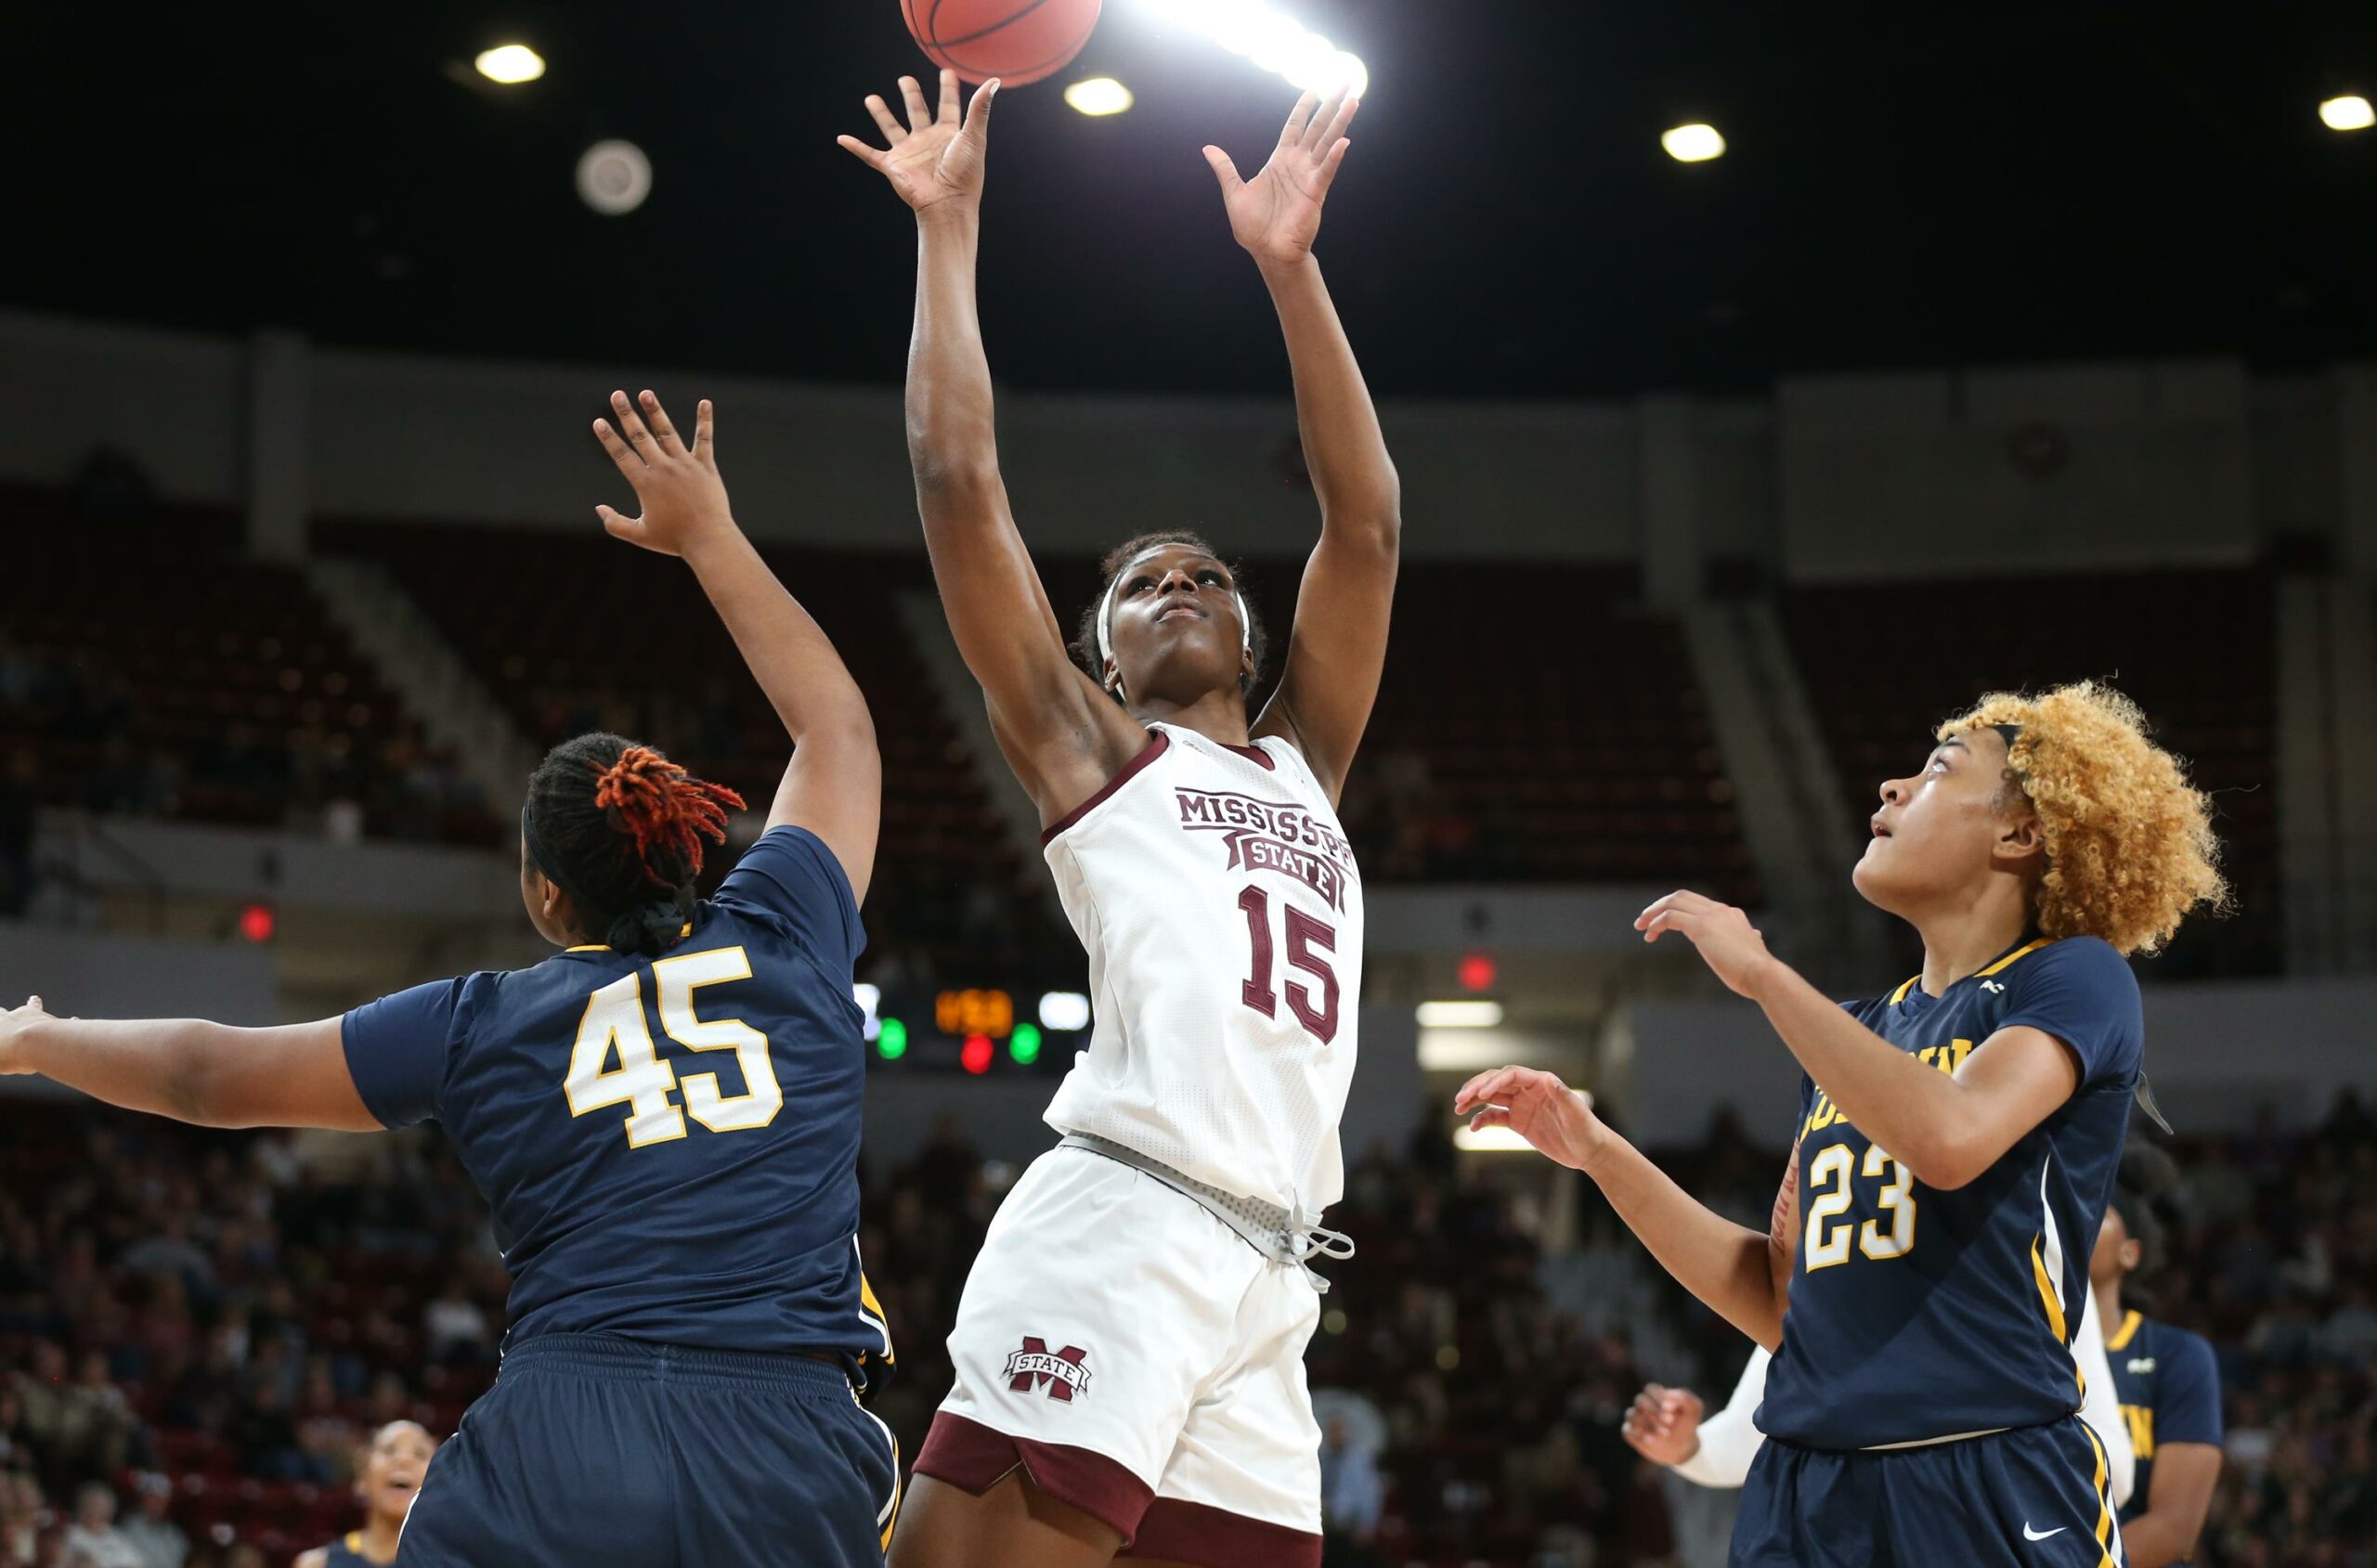 Mississippi State raises National Finalist banner before cruising to 110-38 win over Coppin State